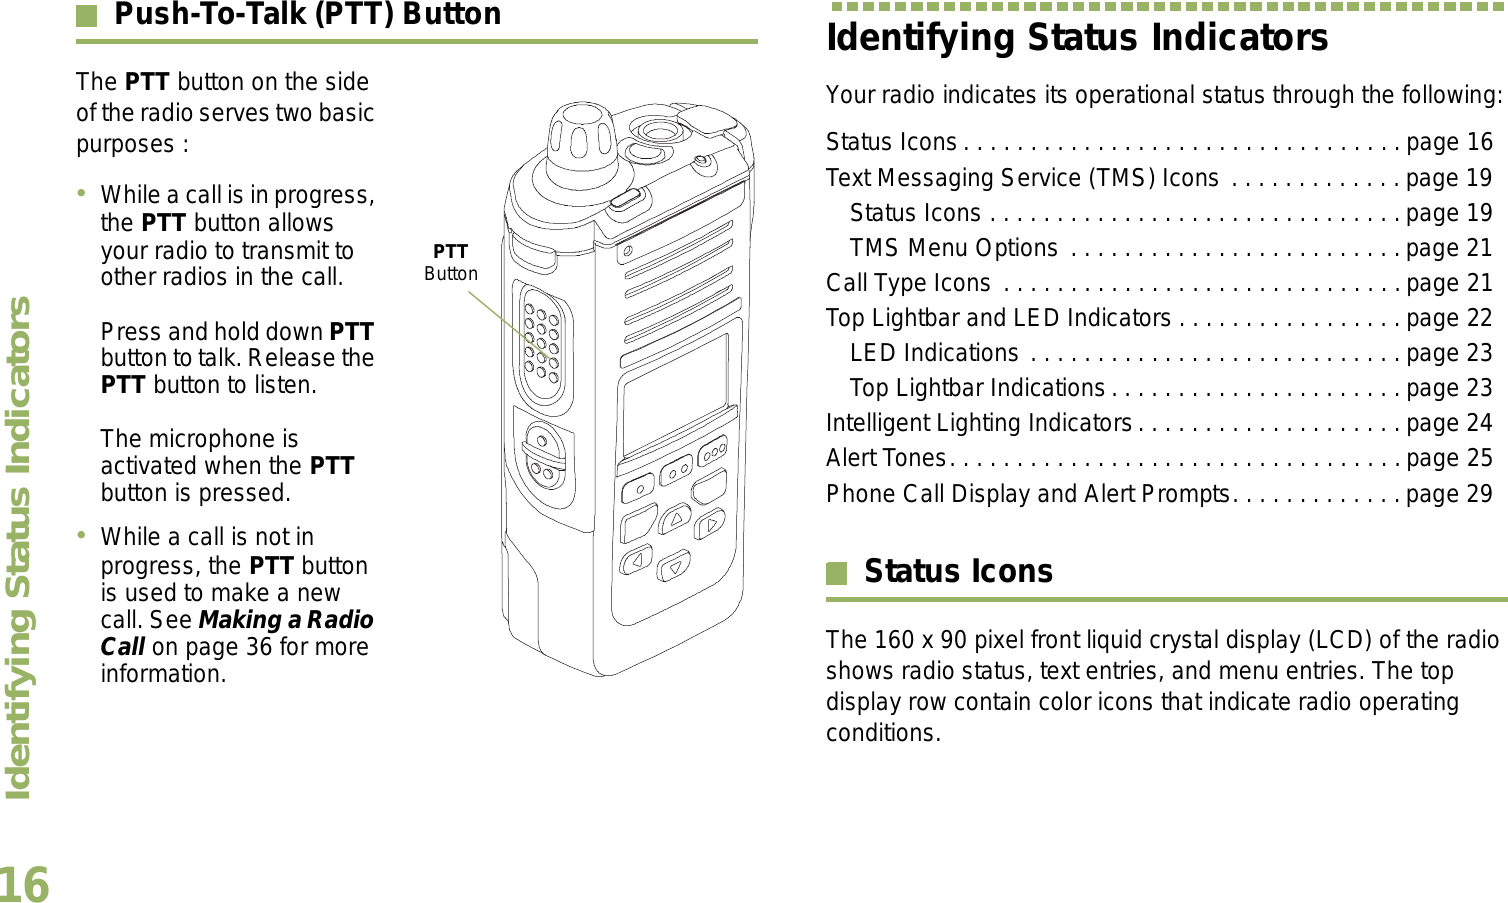 Identifying Status IndicatorsEnglish16Push-To-Talk (PTT) ButtonThe PTT button on the side of the radio serves two basic purposes :While a call is in progress, the PTT button allows your radio to transmit to other radios in the call.Press and hold down PTT button to talk. Release the PTT button to listen.The microphone is activated when the PTT button is pressed.While a call is not in progress, the PTT button is used to make a new call. See Making a Radio Call on page 36 for more information.Identifying Status IndicatorsYour radio indicates its operational status through the following:Status Icons. . . . . . . . . . . . . . . . . . . . . . . . . . . . . . . . . page 16Text Messaging Service (TMS) Icons . . . . . . . . . . . . . page 19Status Icons . . . . . . . . . . . . . . . . . . . . . . . . . . . . . . .page 19TMS Menu Options . . . . . . . . . . . . . . . . . . . . . . . . .page 21Call Type Icons . . . . . . . . . . . . . . . . . . . . . . . . . . . . . .page 21Top Lightbar and LED Indicators . . . . . . . . . . . . . . . . . page 22LED Indications . . . . . . . . . . . . . . . . . . . . . . . . . . . . page 23Top Lightbar Indications. . . . . . . . . . . . . . . . . . . . . . page 23Intelligent Lighting Indicators. . . . . . . . . . . . . . . . . . . . page 24Alert Tones. . . . . . . . . . . . . . . . . . . . . . . . . . . . . . . . . .page 25Phone Call Display and Alert Prompts. . . . . . . . . . . . .page 29Status IconsThe 160 x 90 pixel front liquid crystal display (LCD) of the radio shows radio status, text entries, and menu entries. The top display row contain color icons that indicate radio operating conditions. PTT Button